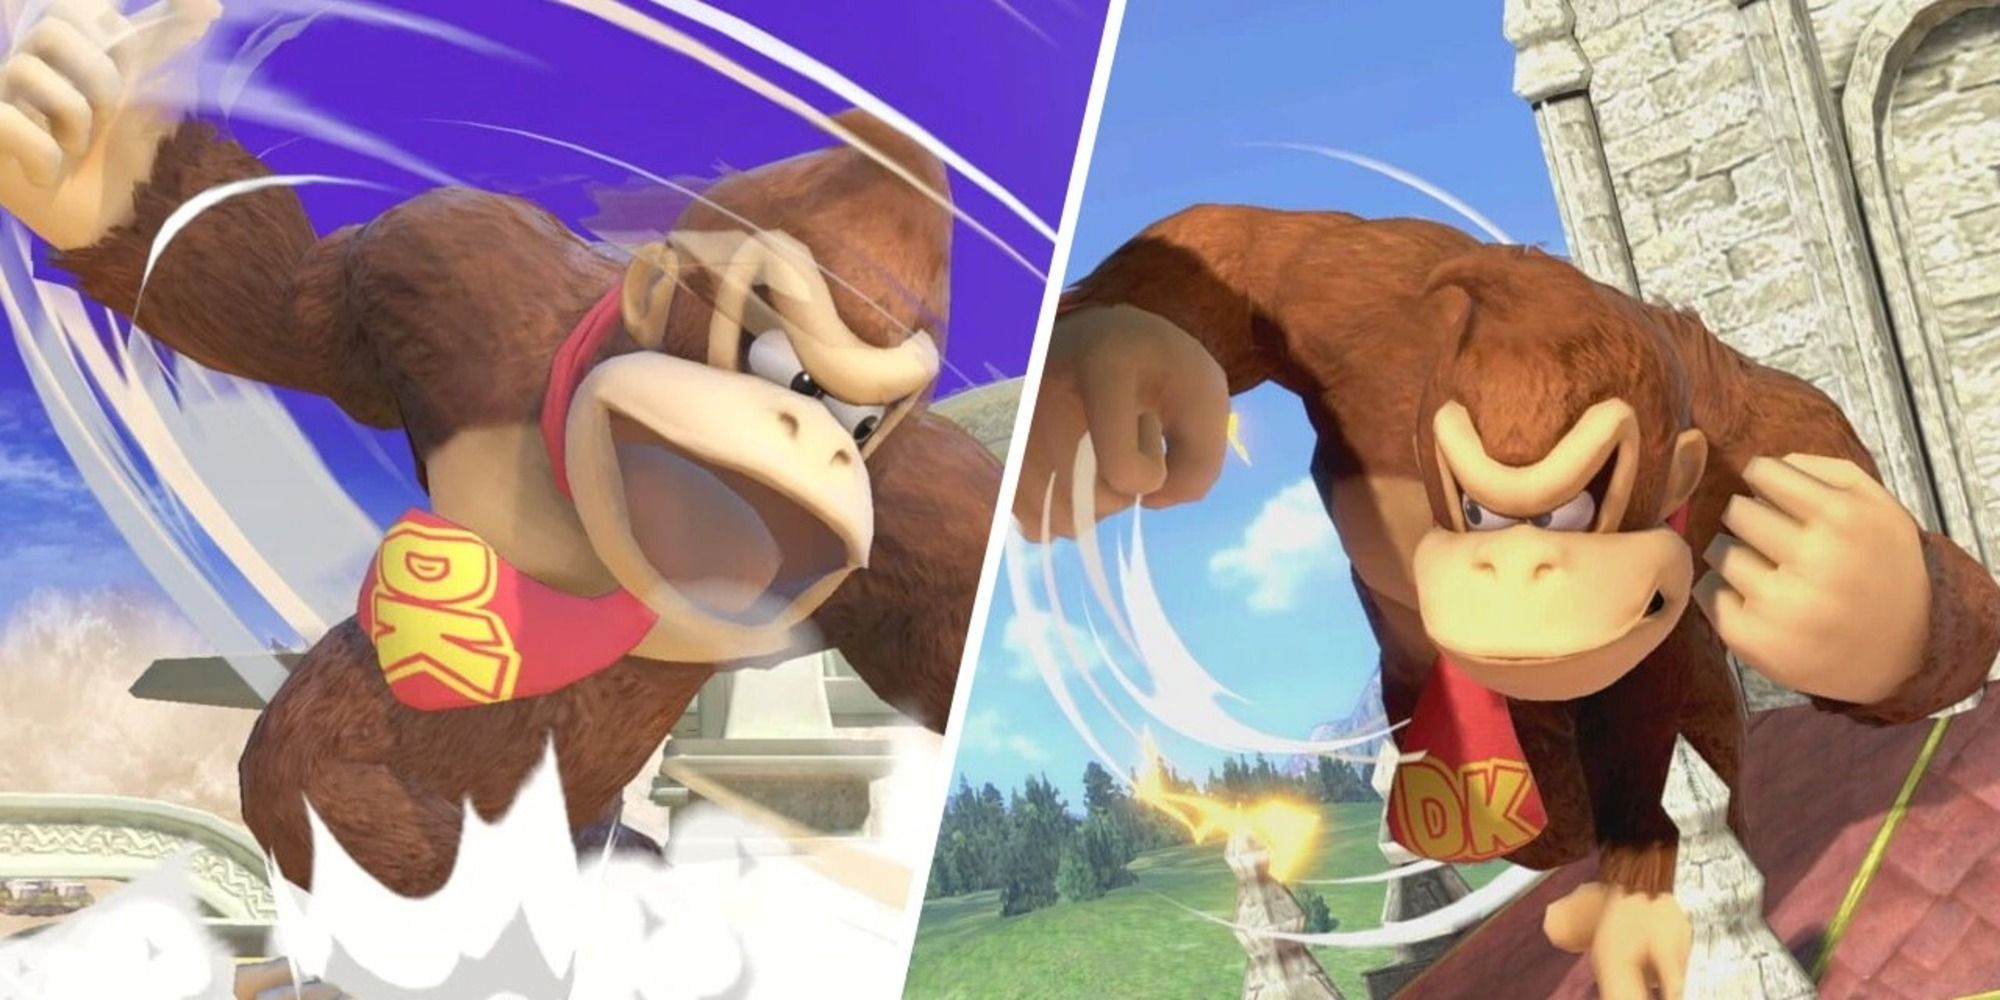 Donkey Kong using his Up-B and Neutral-B in Super Smash Bros. Ultimate.